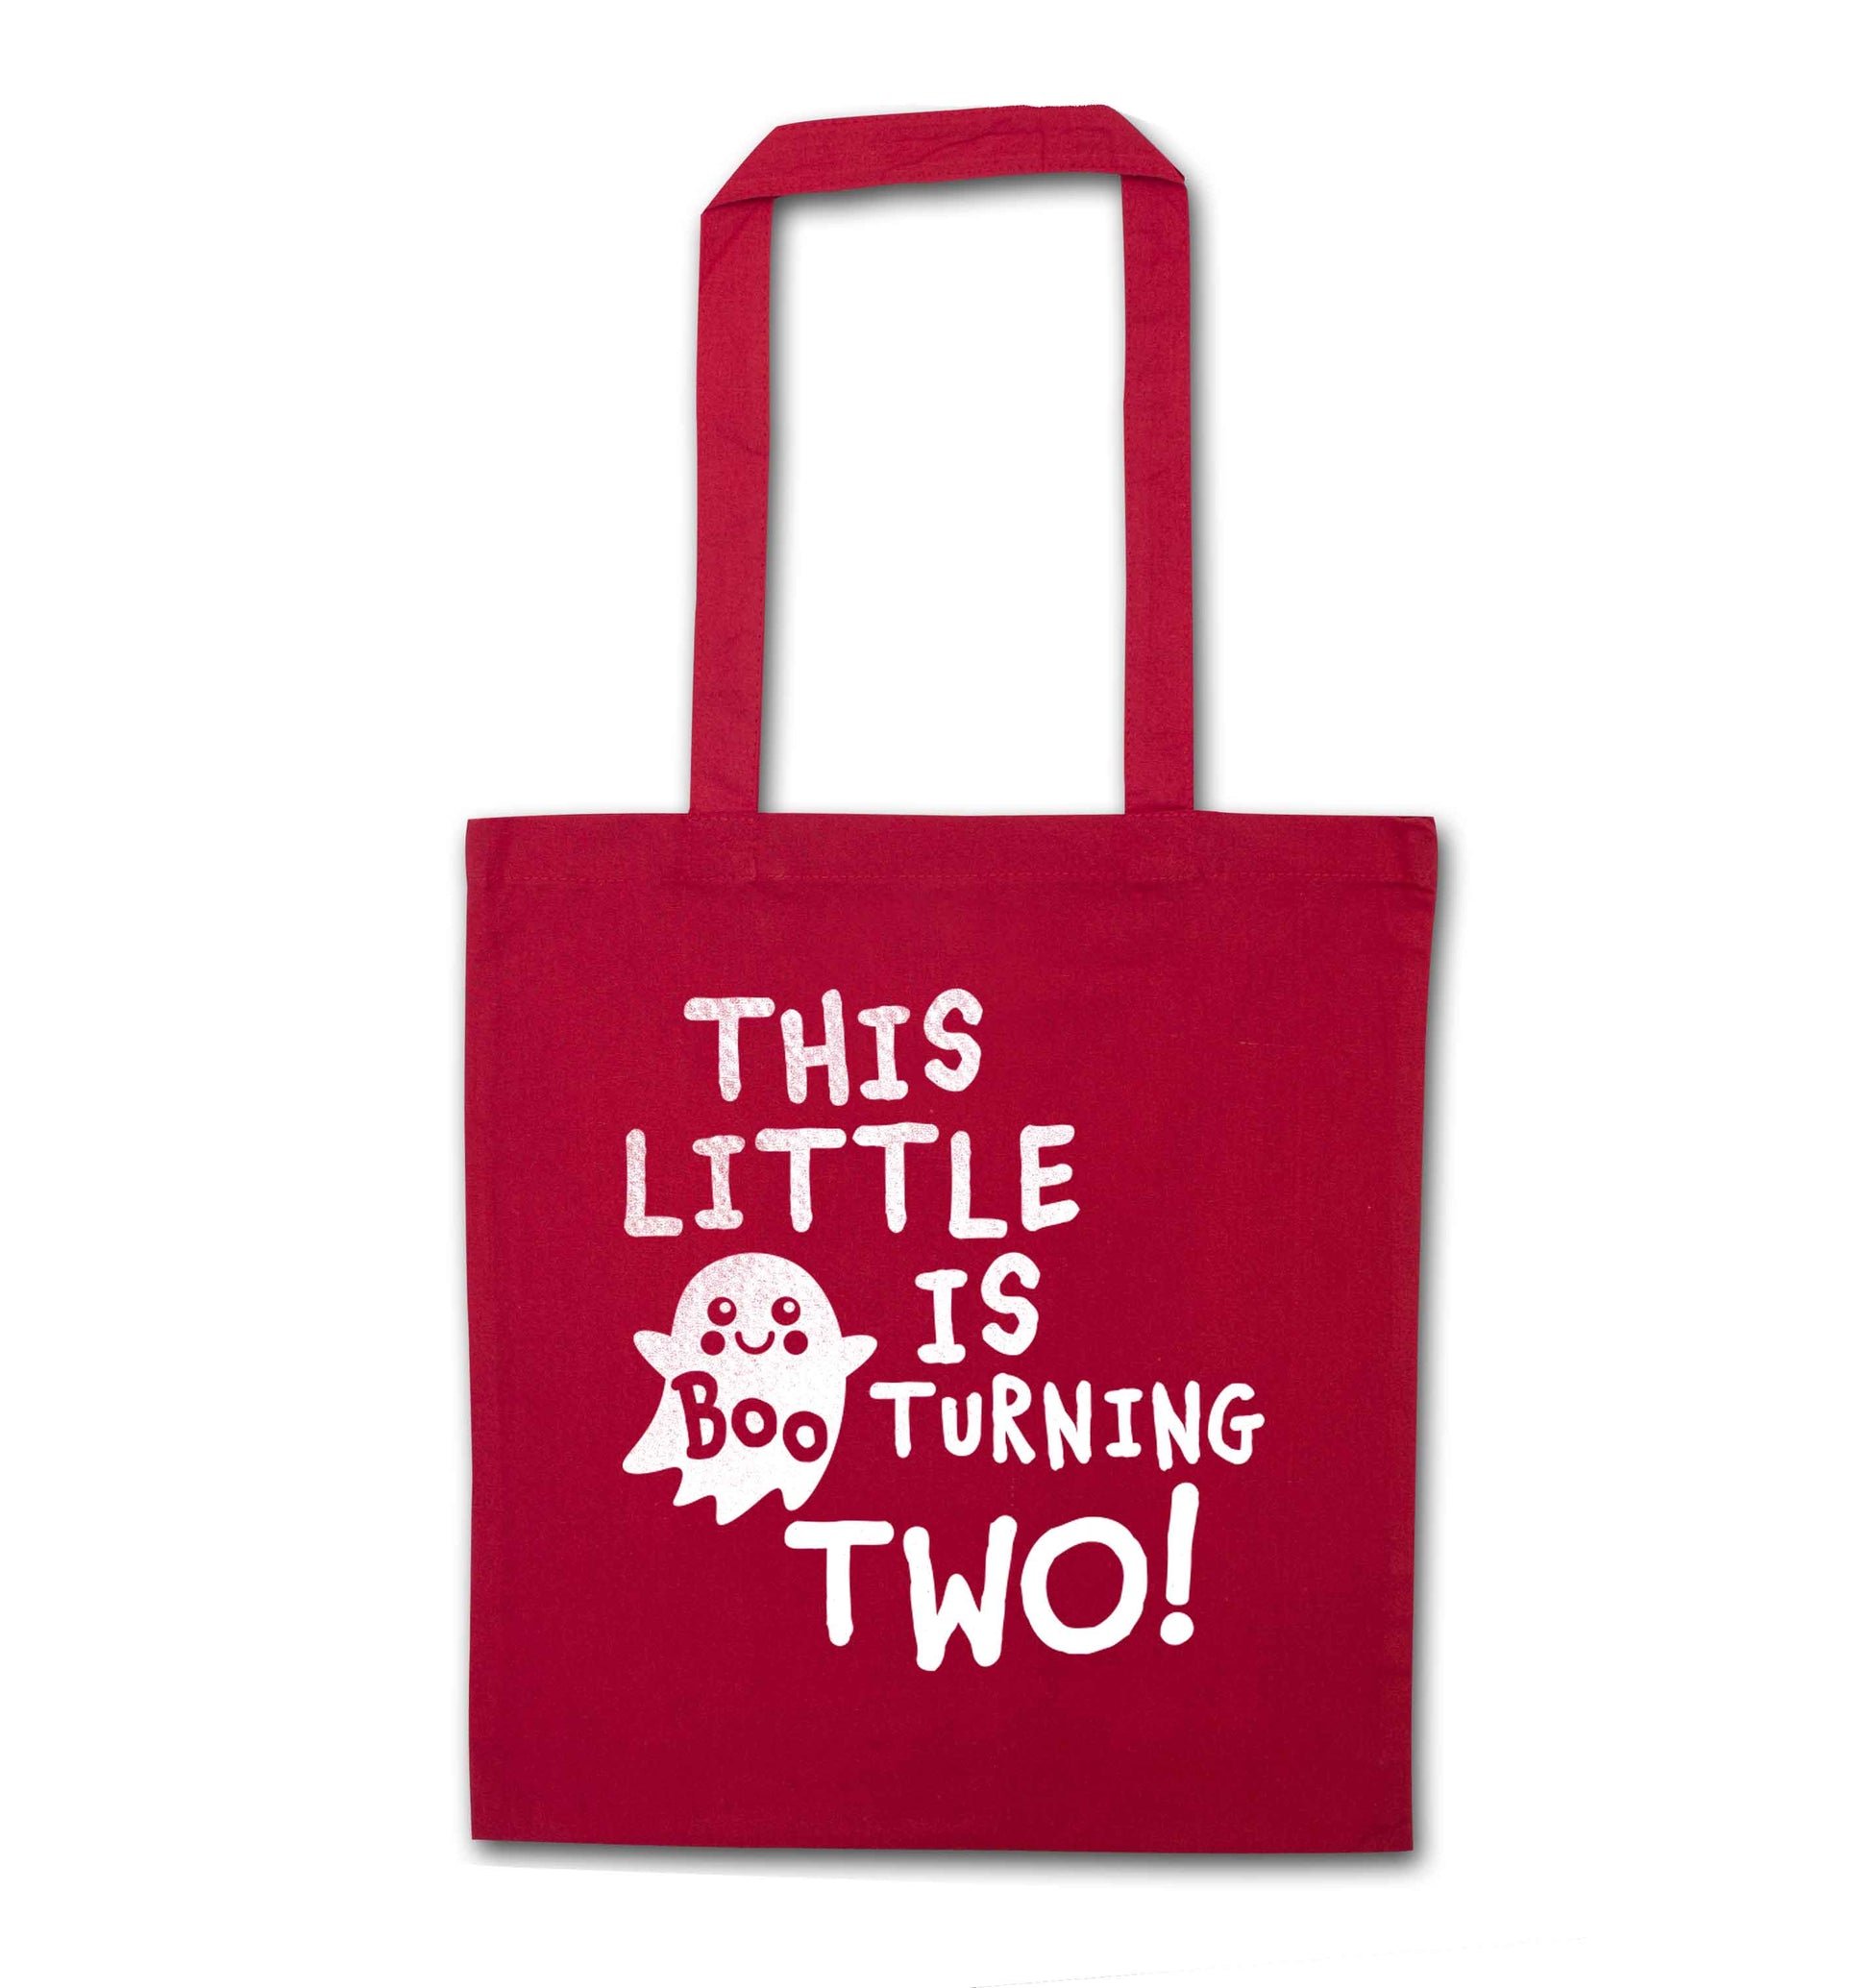 This little boo is turning two red tote bag